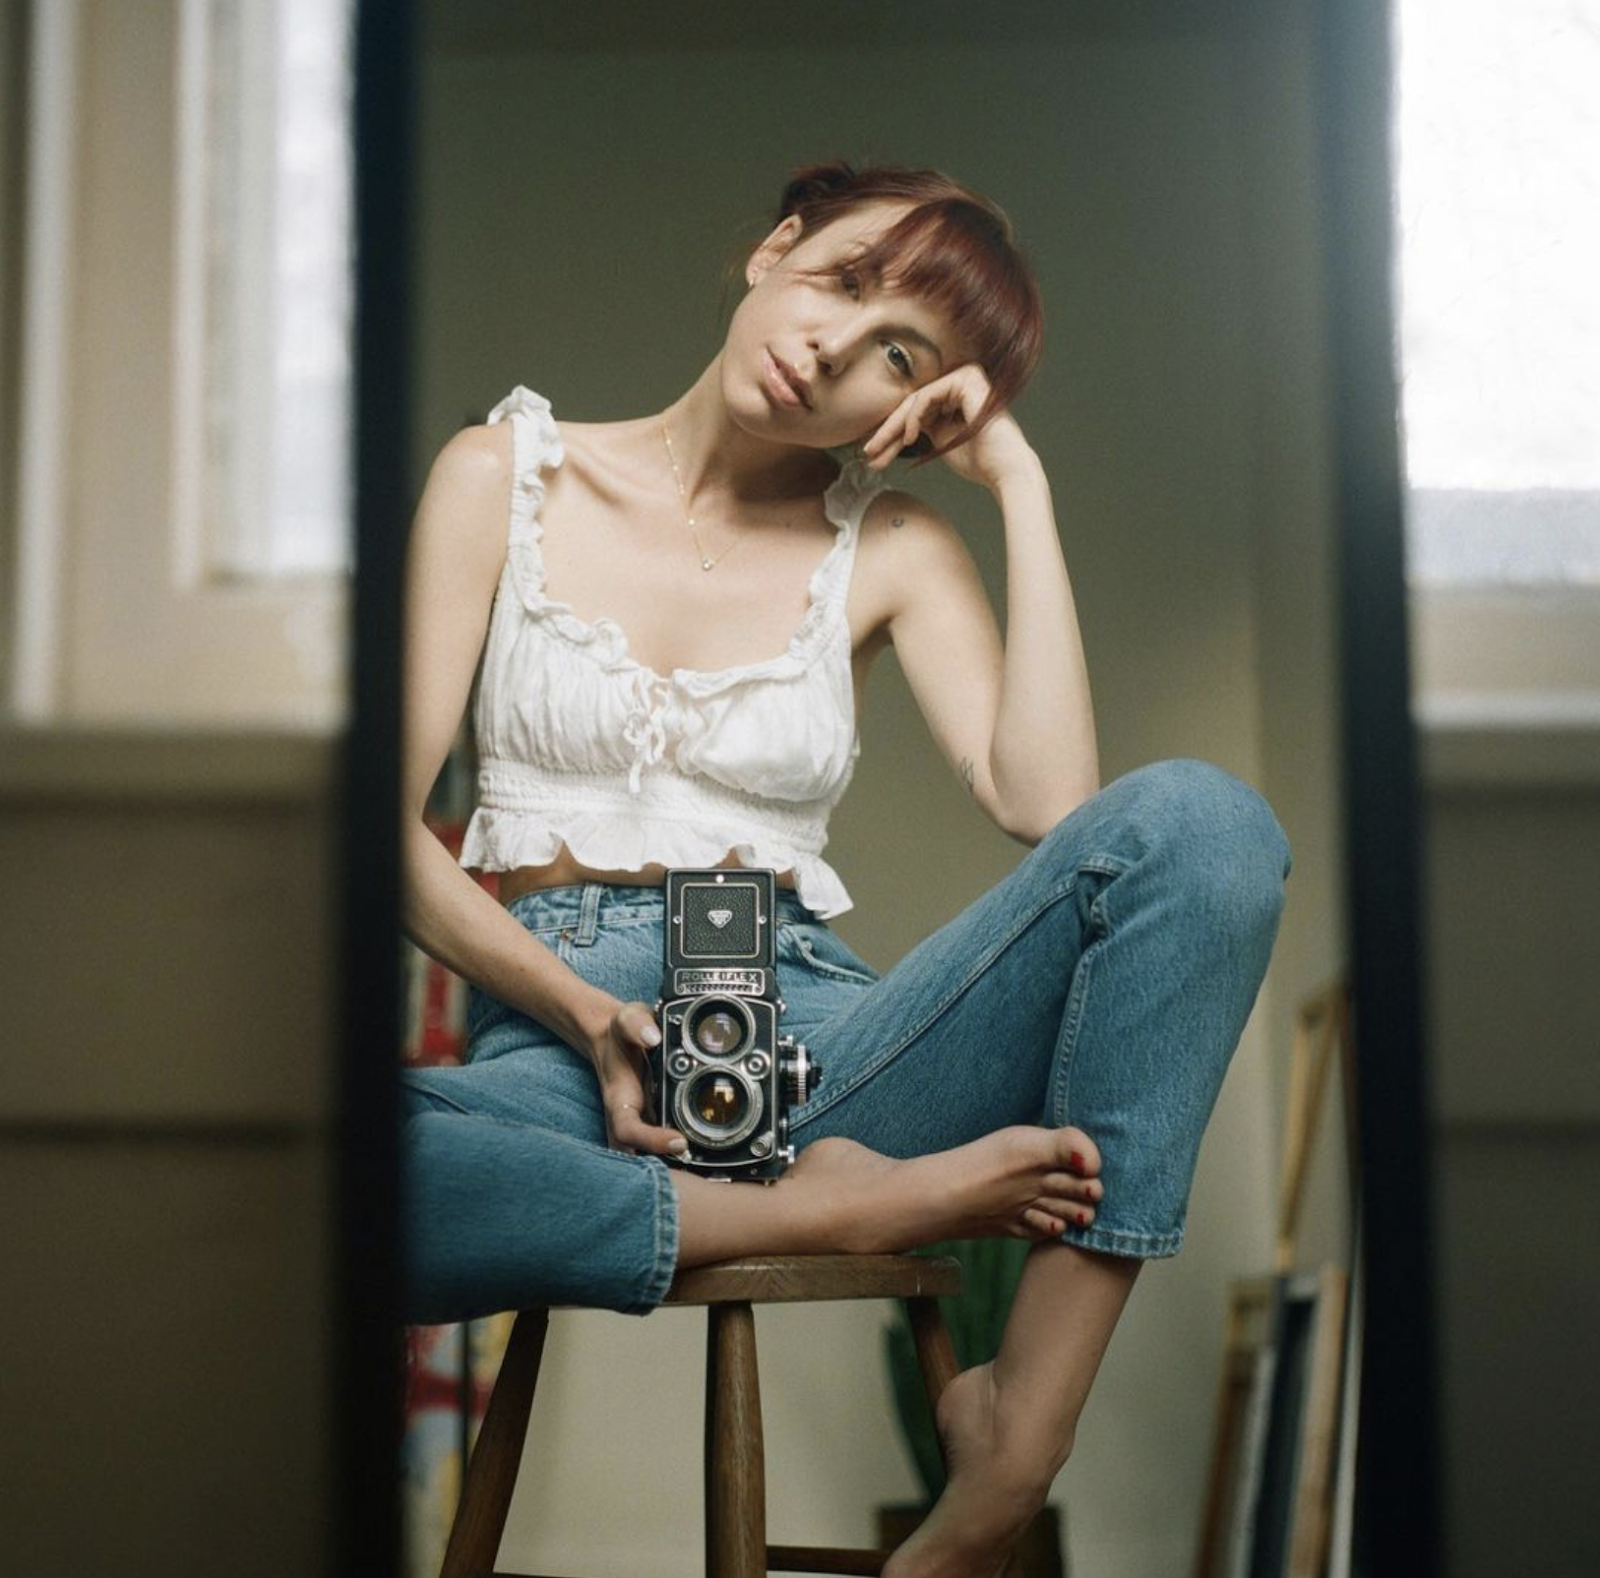 A self portrait taken by photographer Allister Ann, sitting on a wood stool holding a vintage camera, resting her head on her hand.